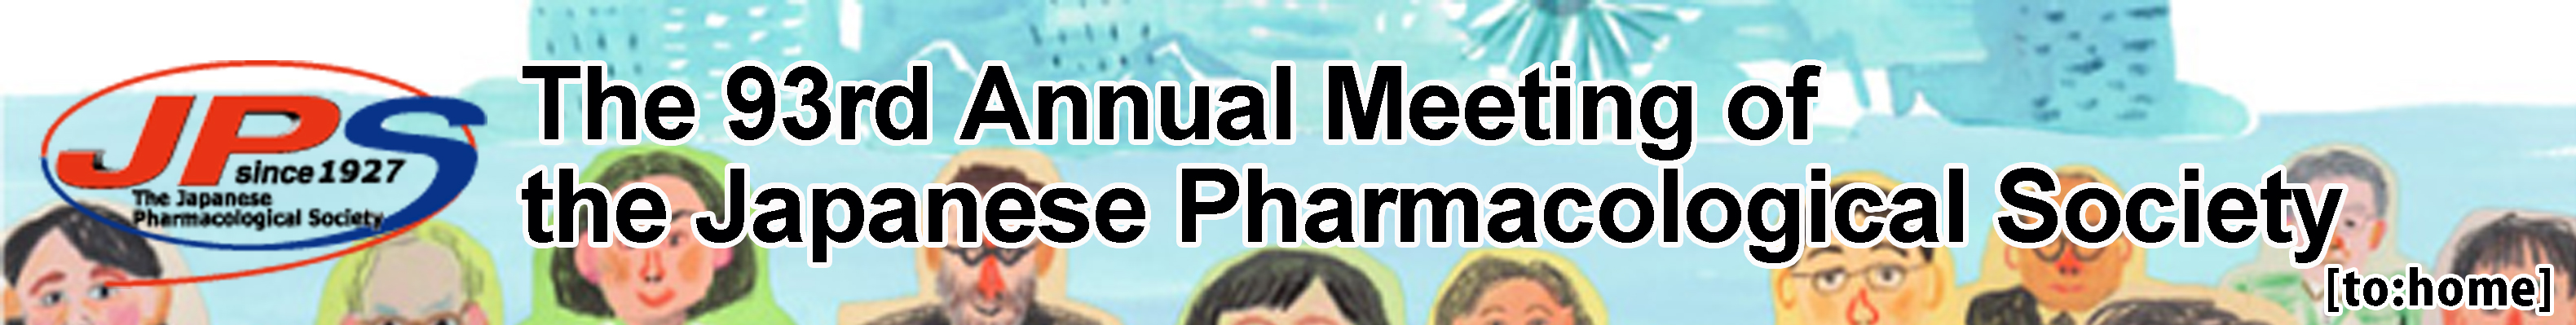 The 93rd Annual Meeting of the Japanese Pharmacological Society